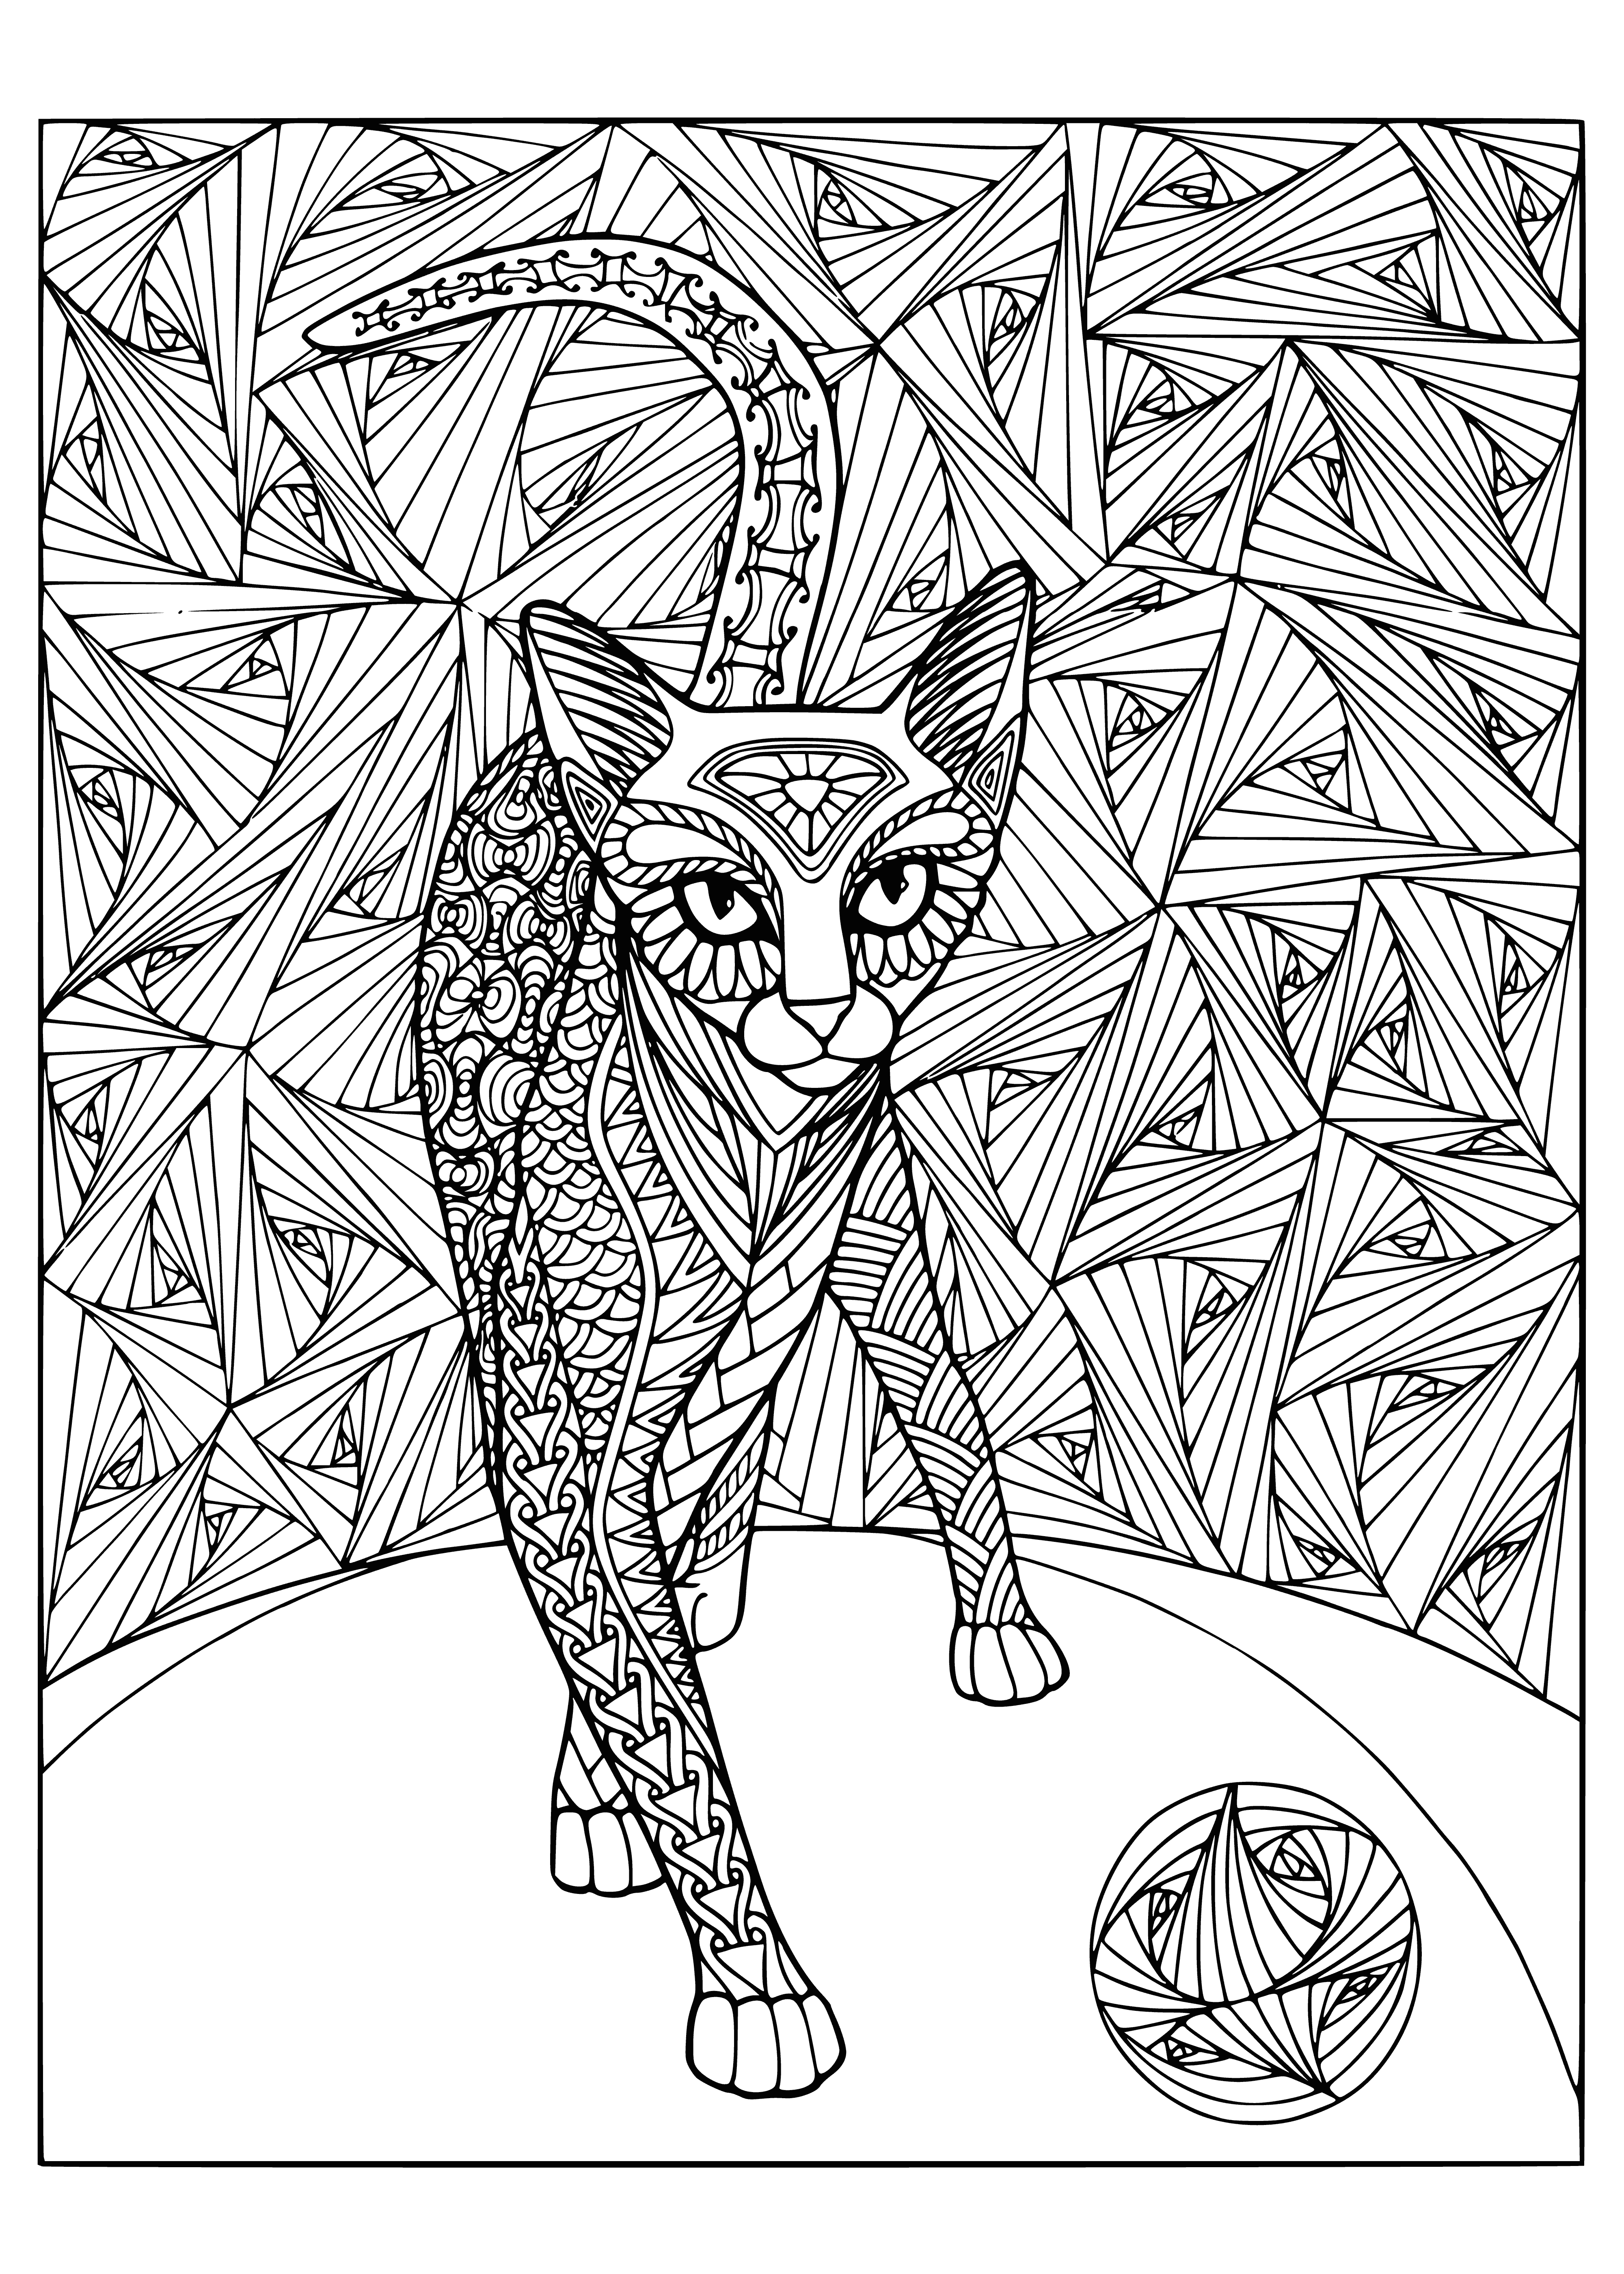 Cat playing with a ball coloring page